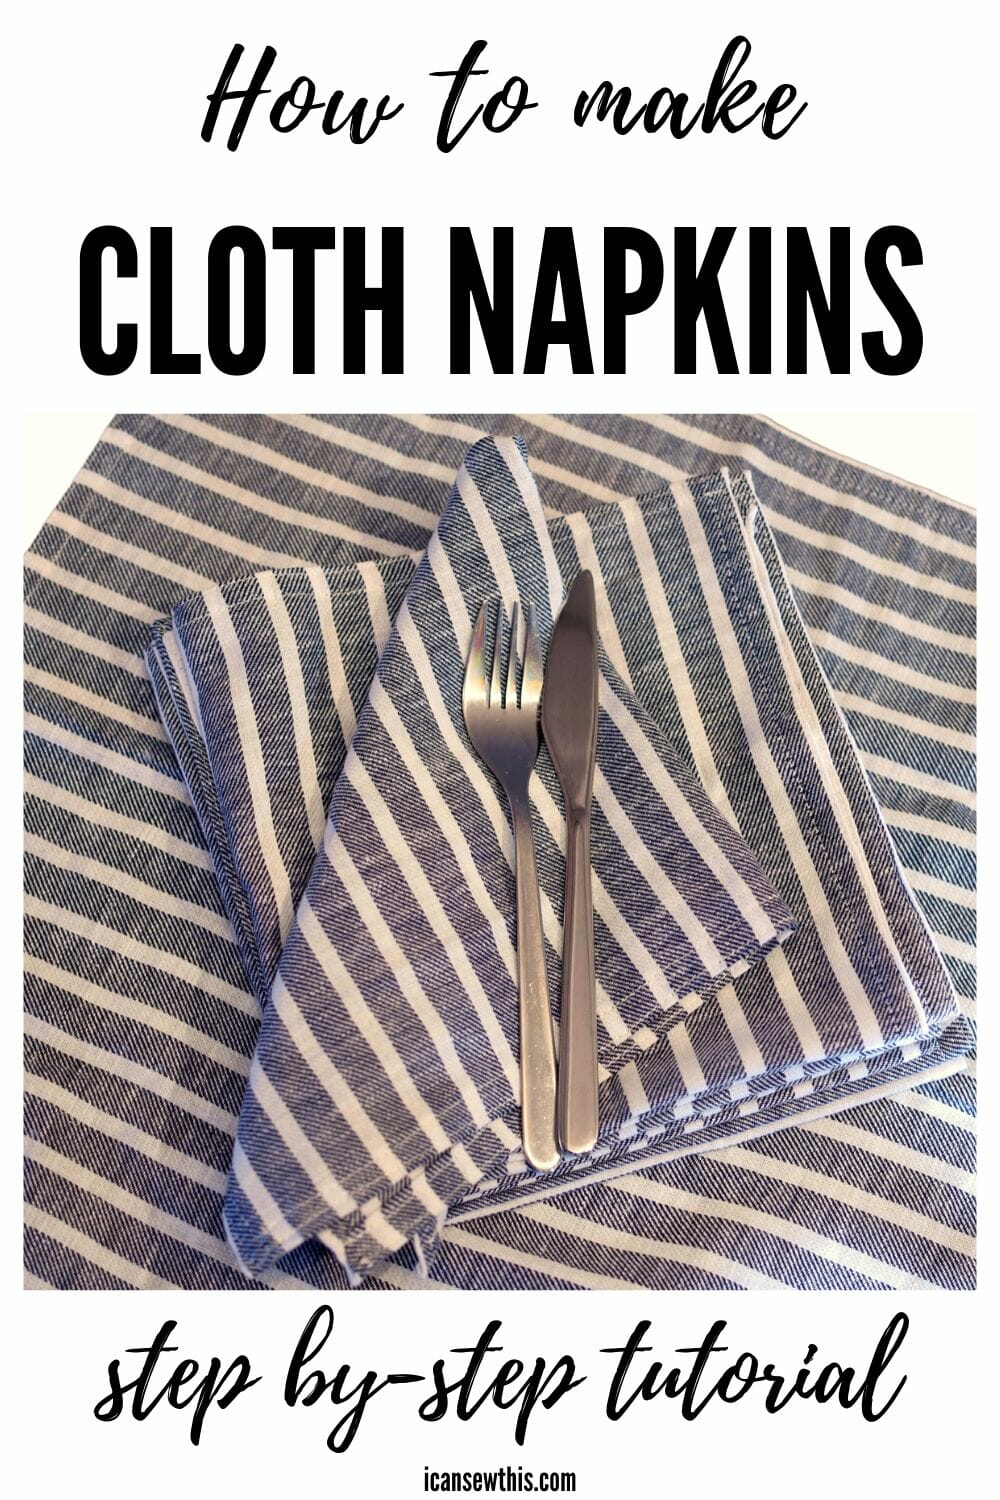 Make a table napkin from fabric - Easy square corner method